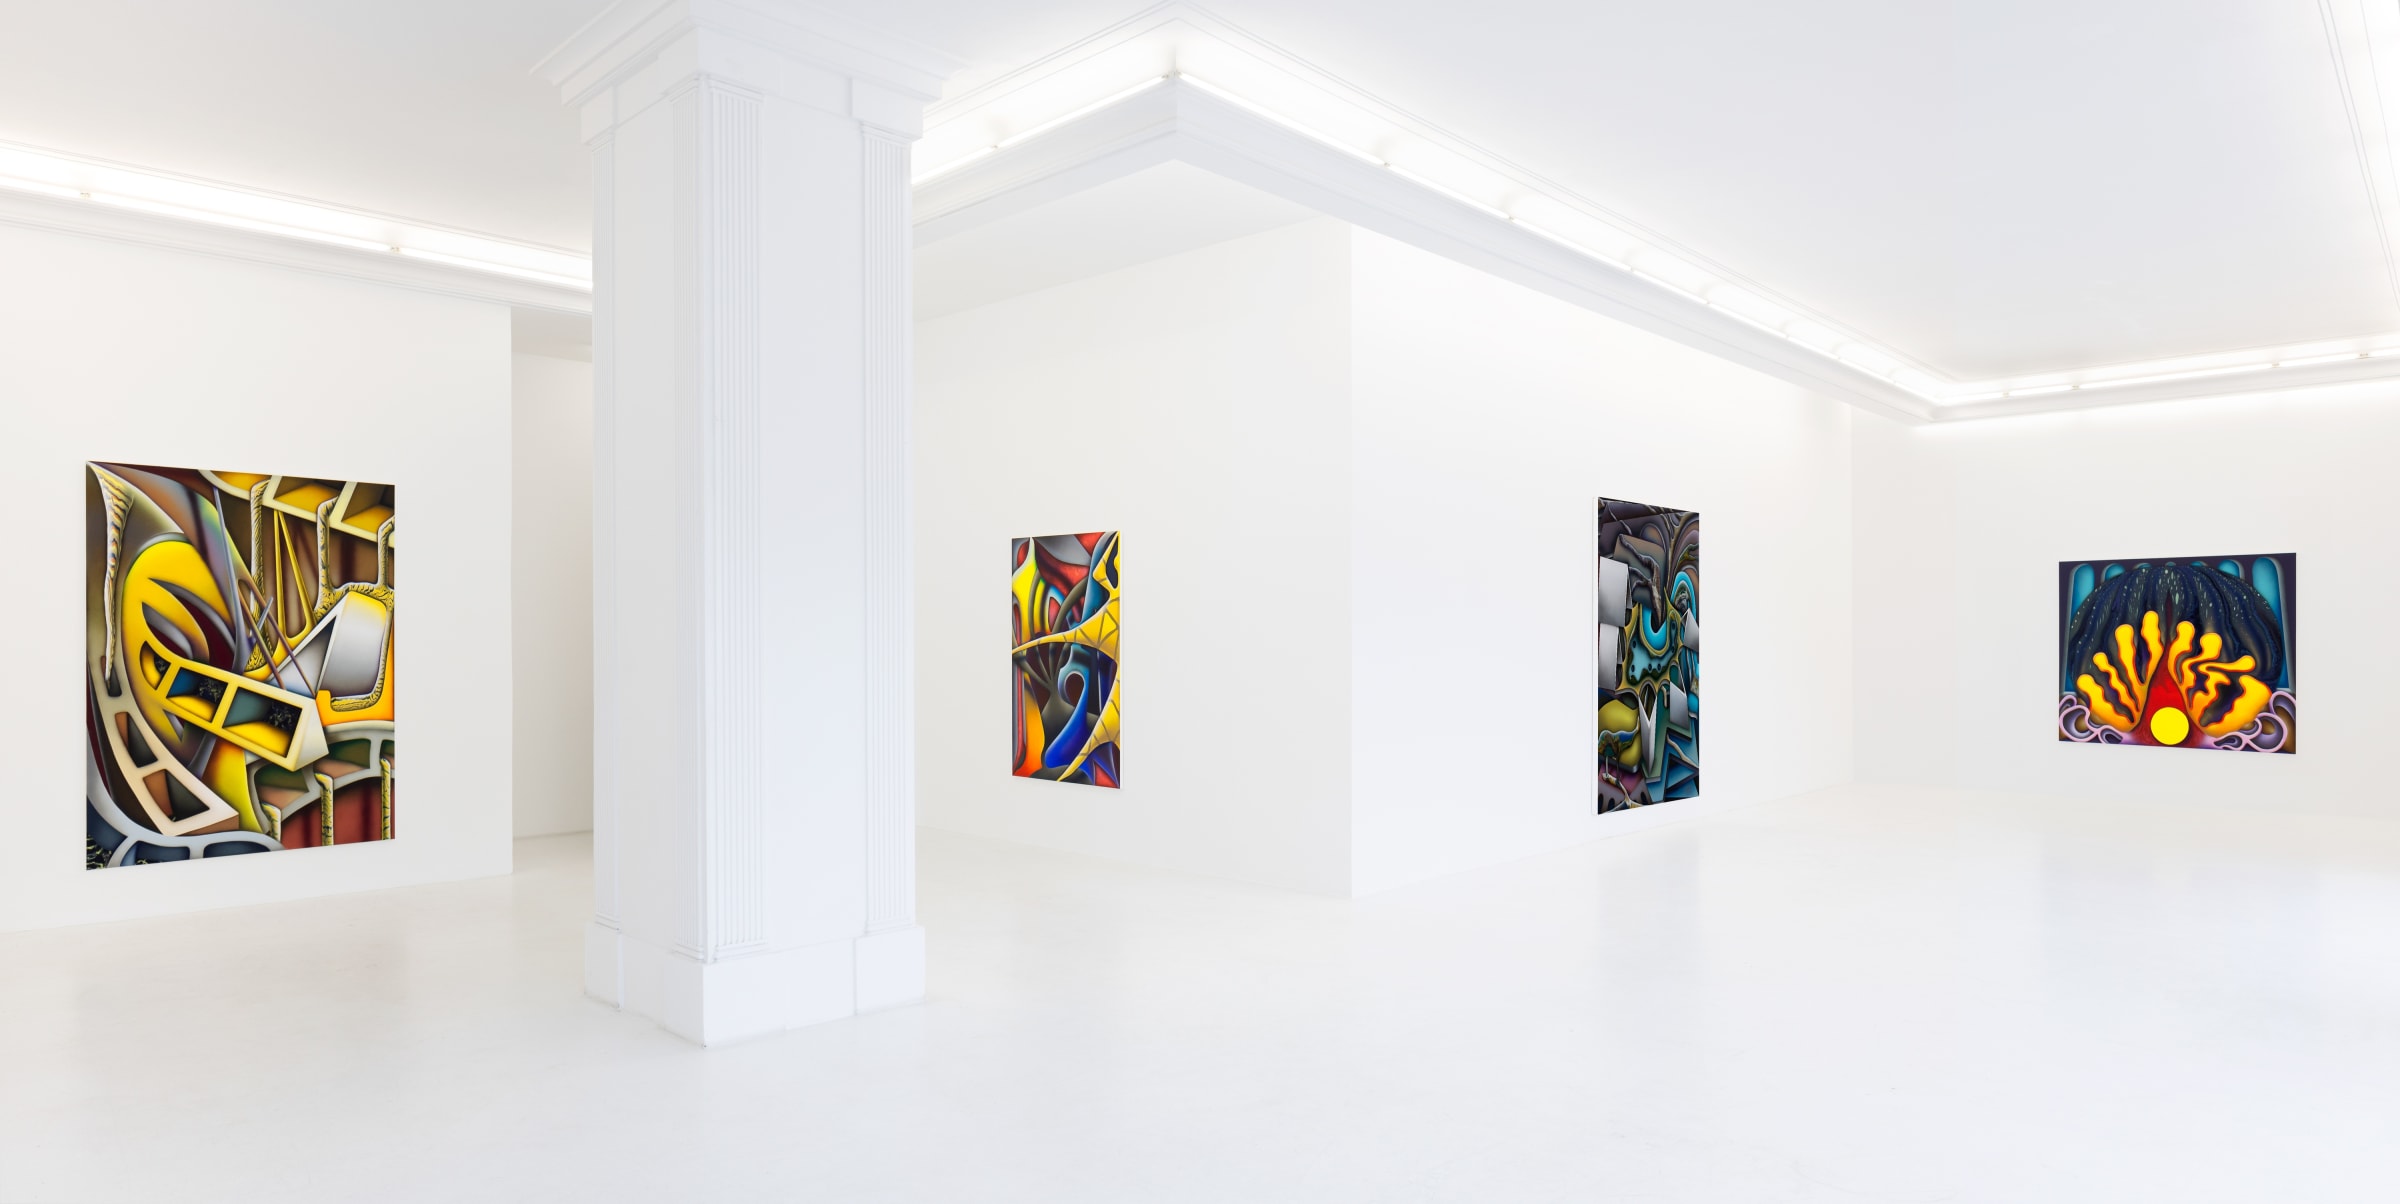 Harm Gerdes Synthetic Spirits Installation View June 10 – July 8, 2022 Peres Projects, Berlin Photographed by: Timo Ohler